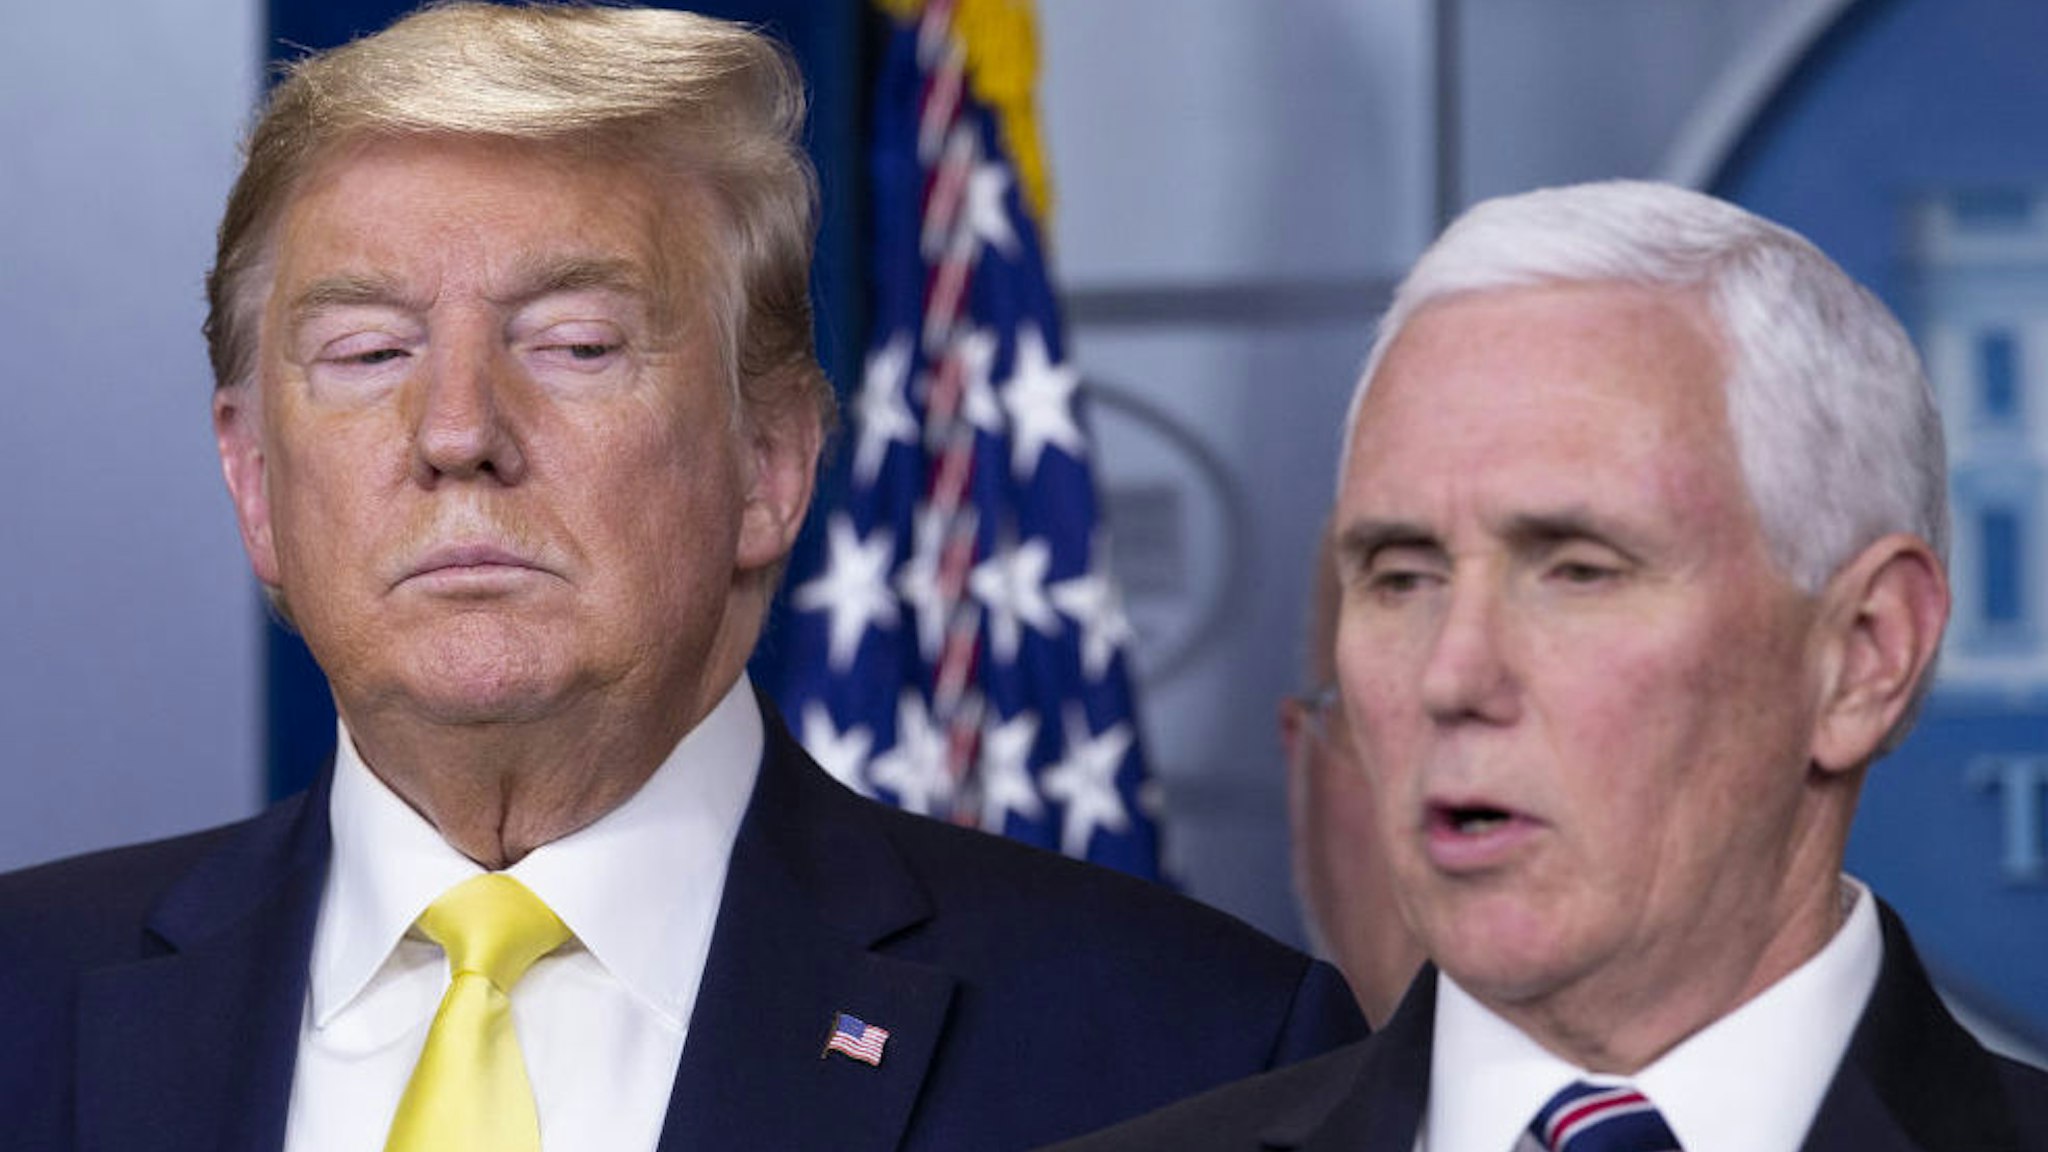 U.S. President Donald Trump, left, listens as Vice President Mike Pence speaks during a news conference in Washington, D.C., U.S., on Monday, March 9, 2020.